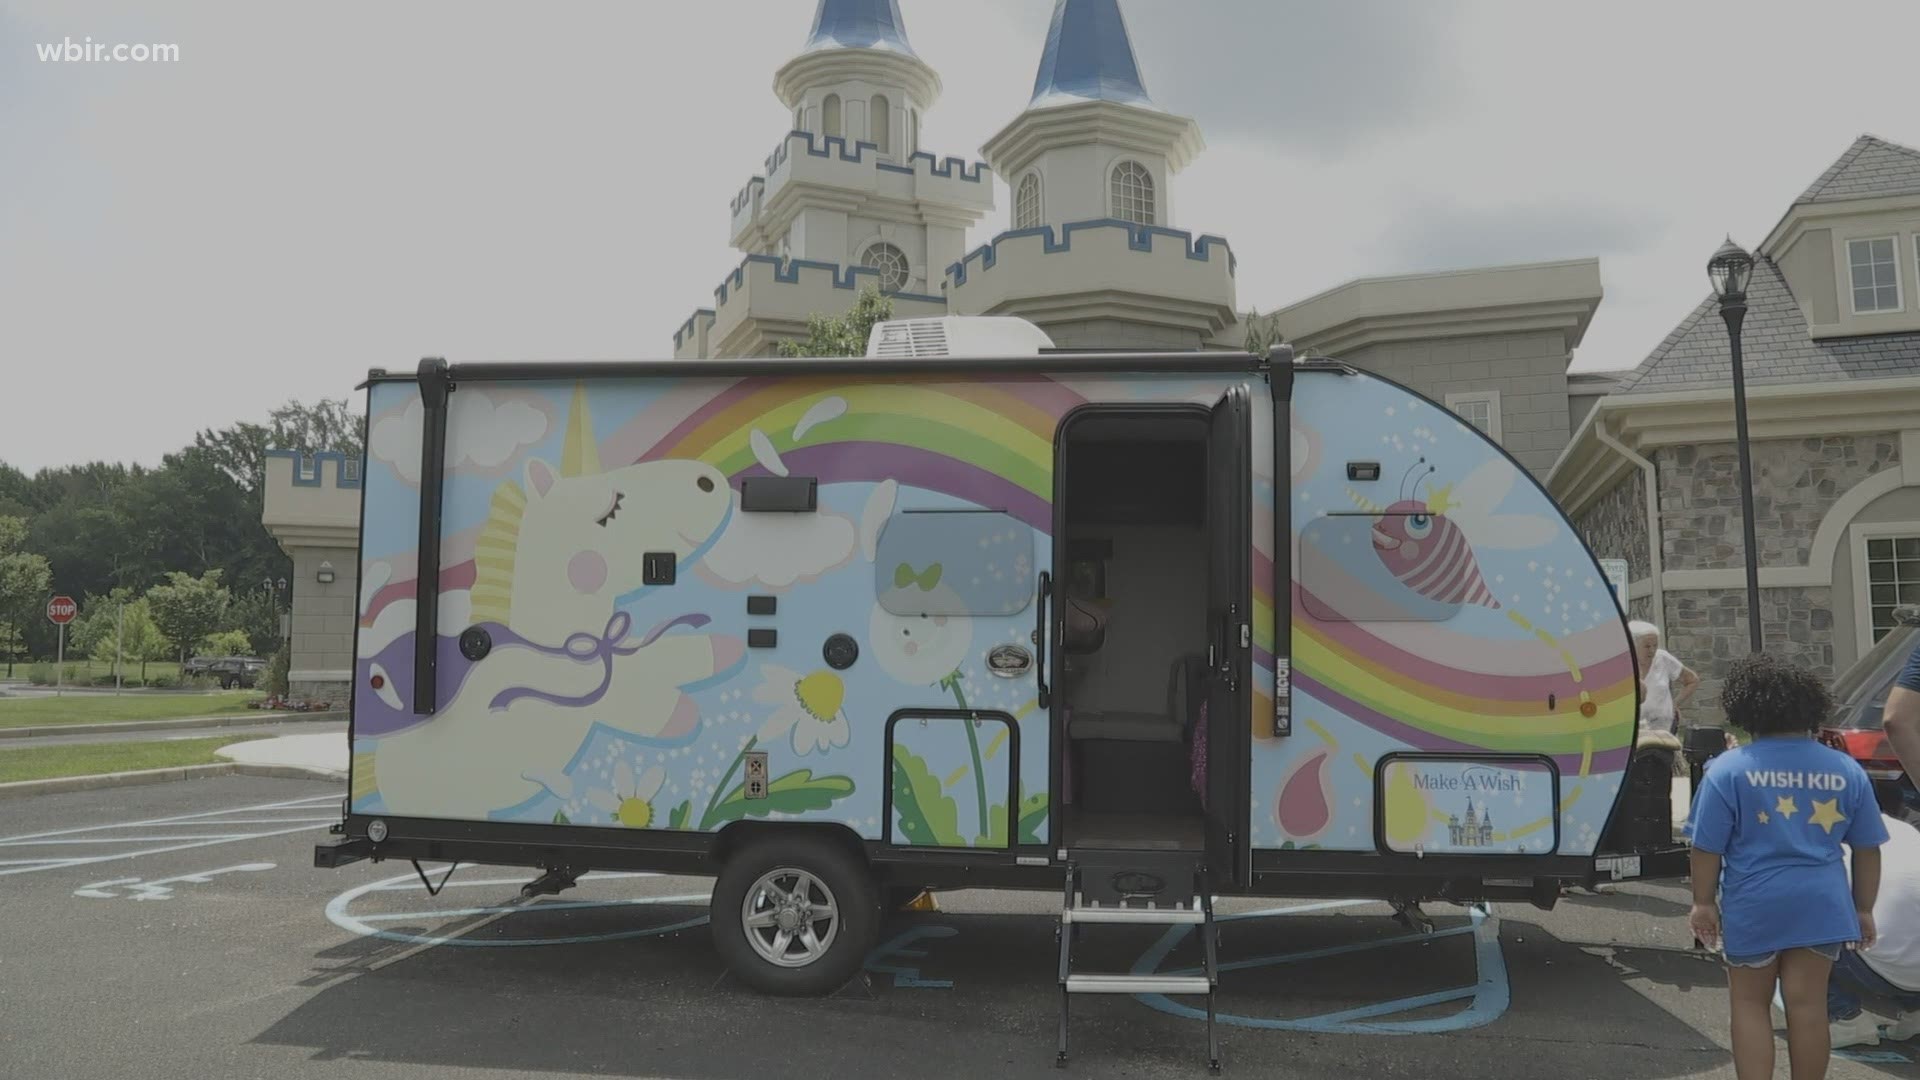 A local Knoxville business helped design the camper